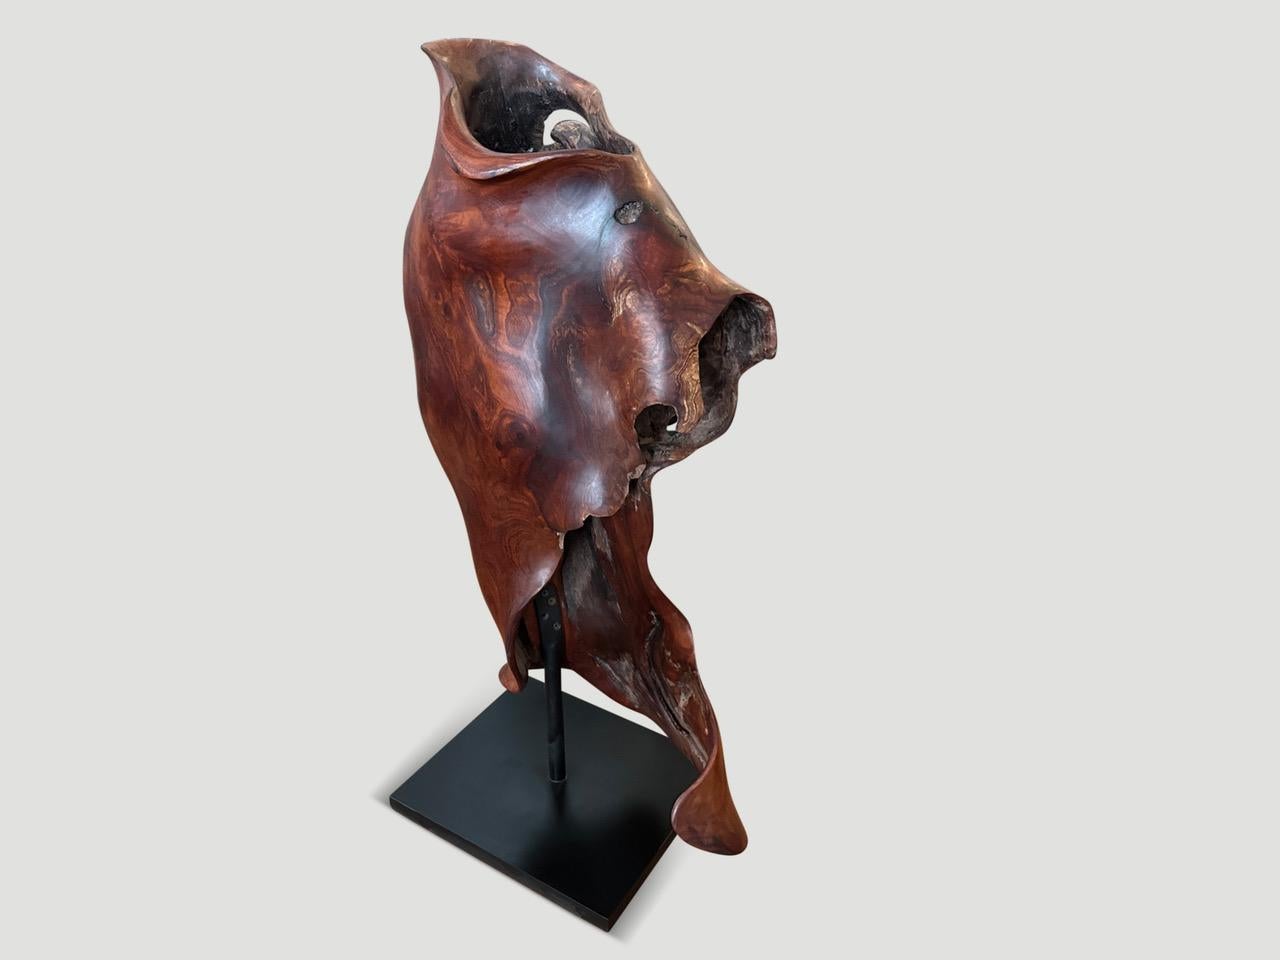 Century year old wood with incredible patina is set on a minimalist black steel base which is twelve x ten inches. This beautiful single piece of wood, resembling a torso, has been hand carved whilst respecting the natural organic shape. It’s all in